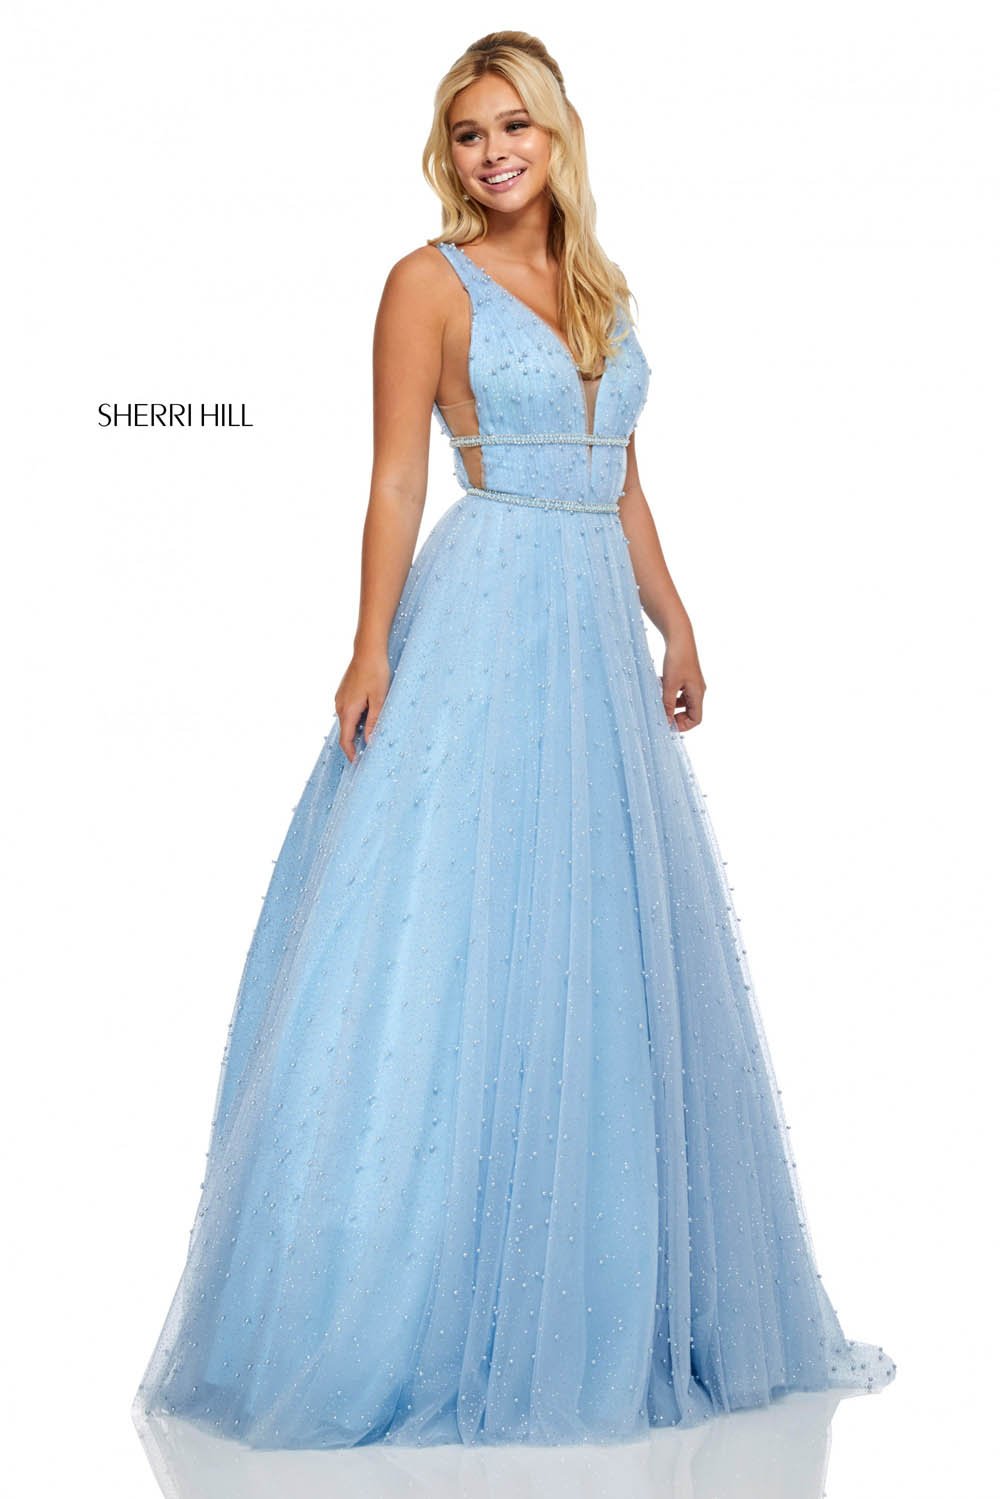 Sherri Hill 52640 dress images in these colors: Champagne, Blush, Light Blue, Lilac.